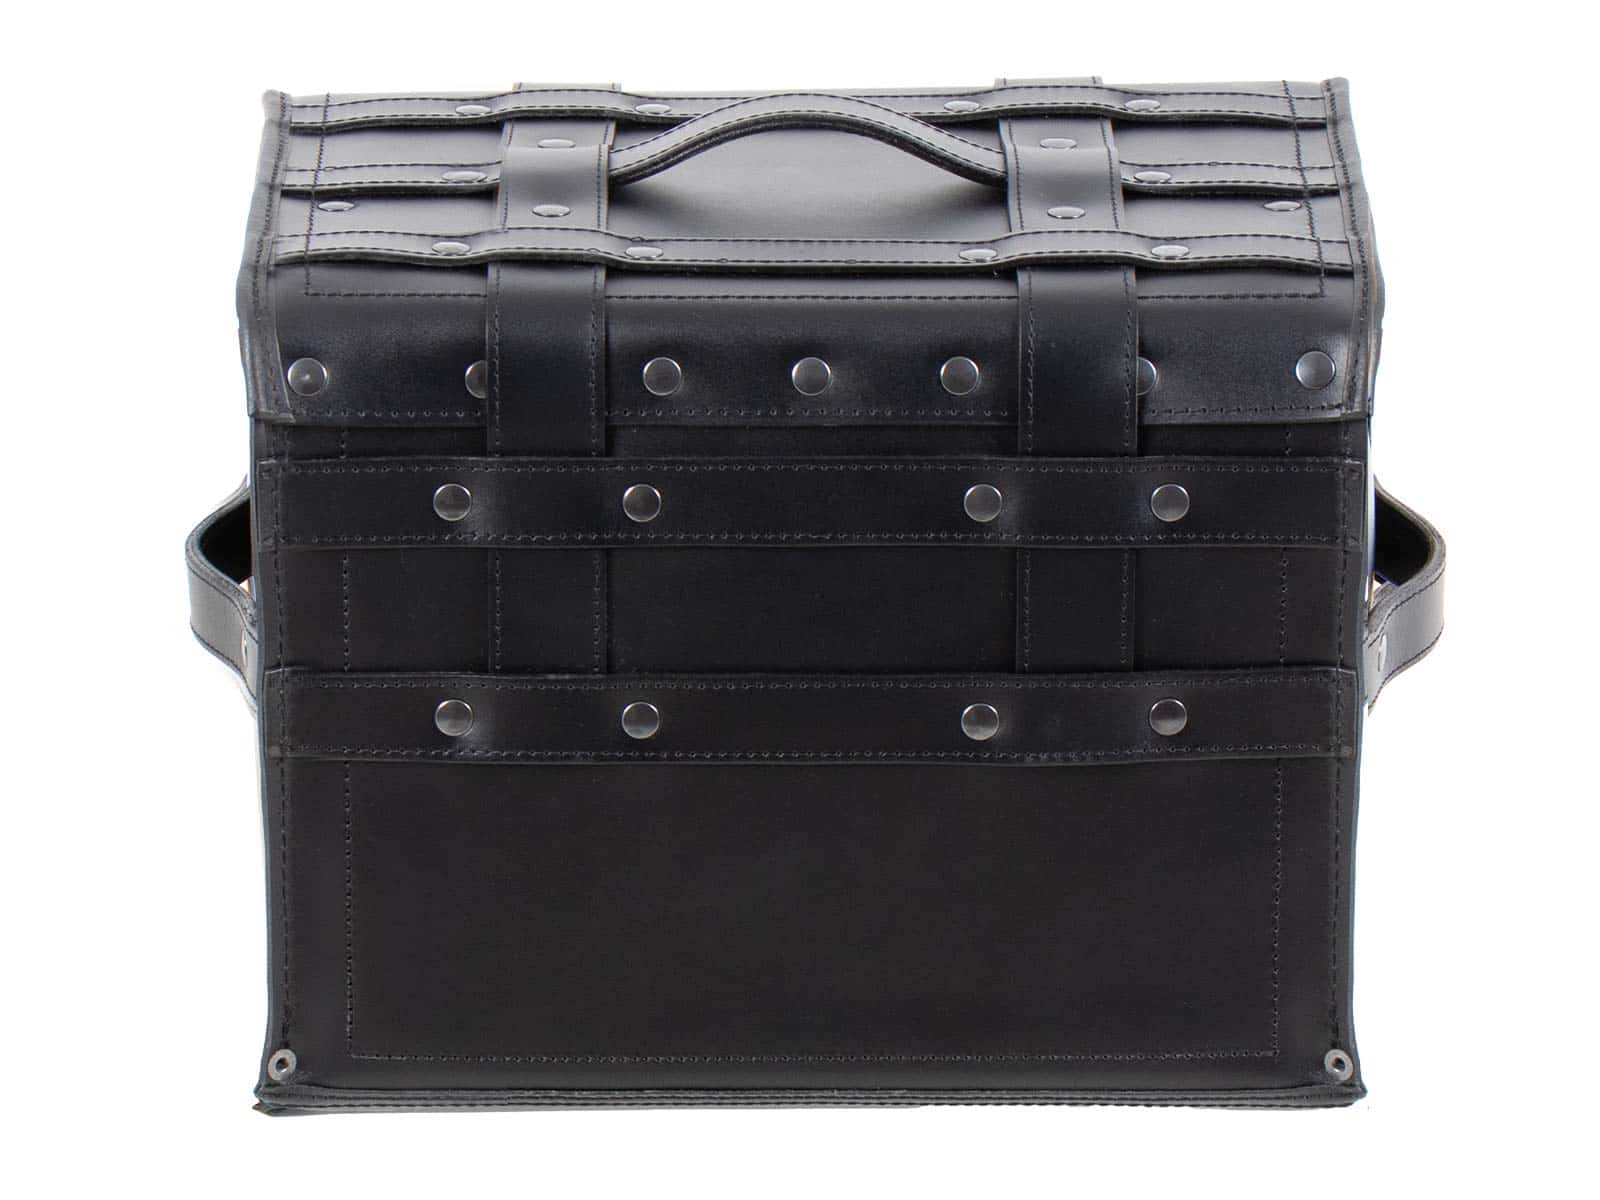 Rugged Chest leather rear bag